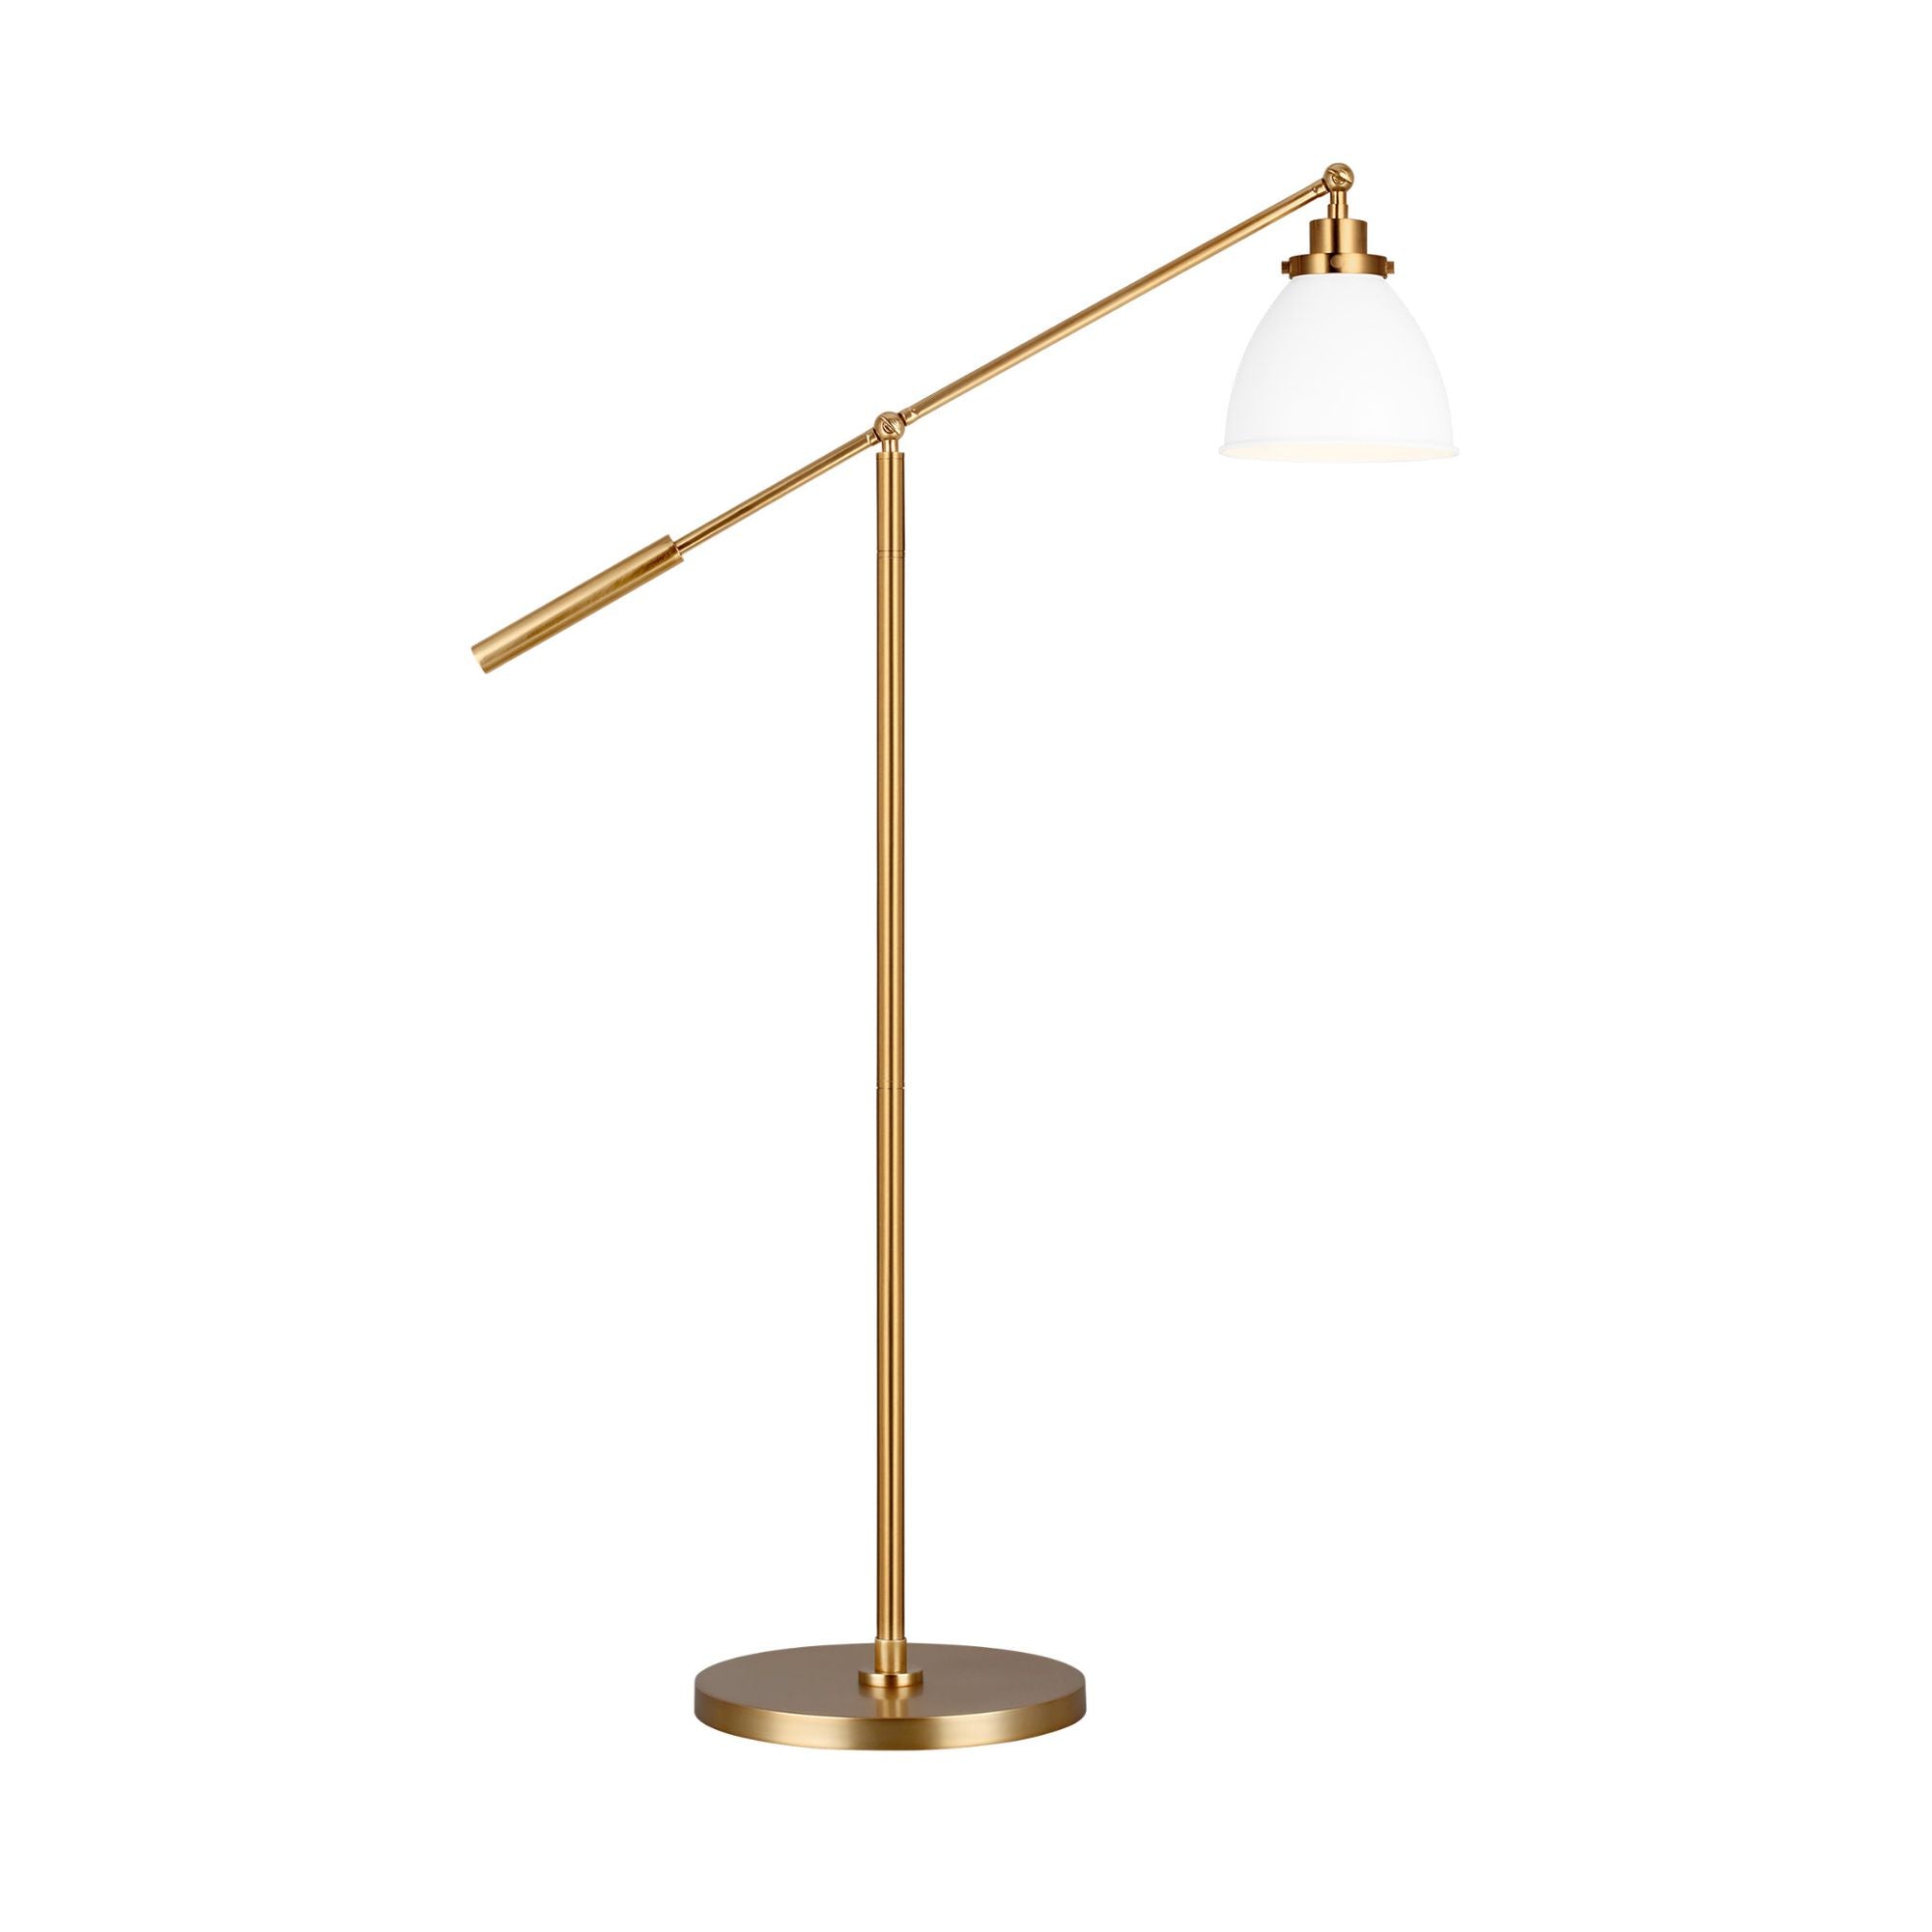 Chapman & Myers Wellfleet Dome Floor Lamp in Matte White and Burnished Brass